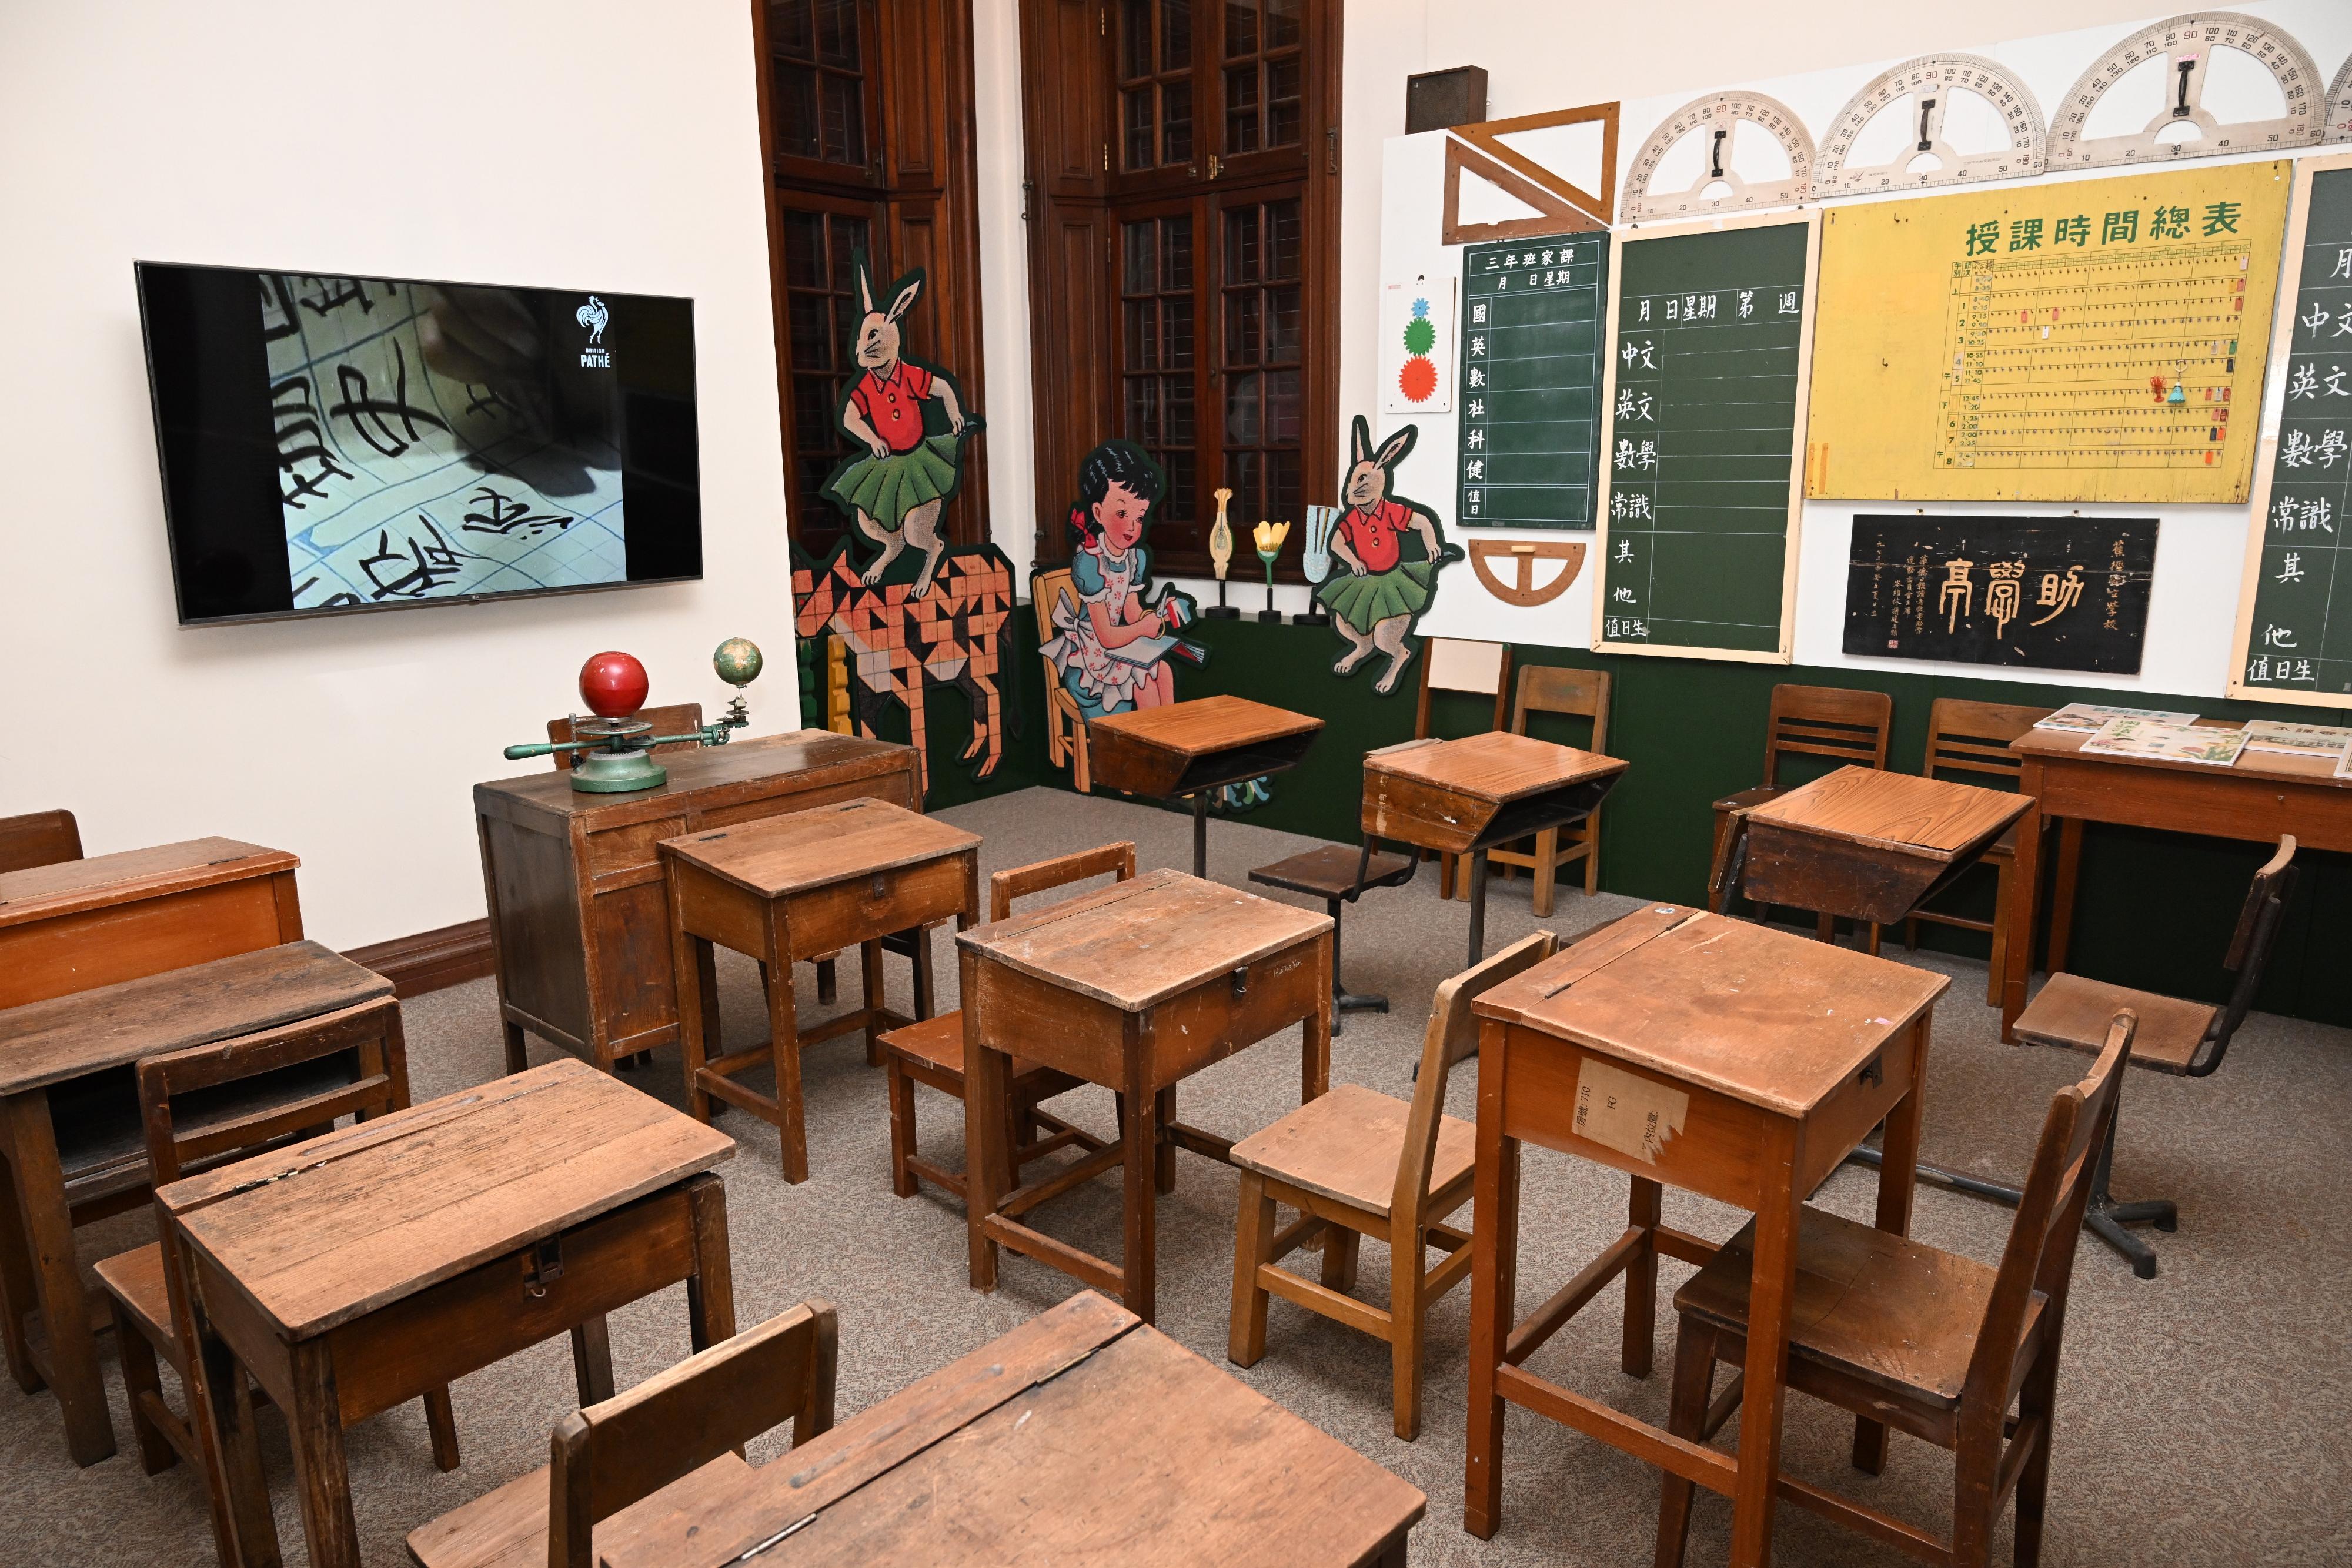 The Dr Sun Yat-sen Museum will launch a new special exhibition, "Learning through play: Old textbooks, toys and games", tomorrow (December 22). Visitors can experience the environment of a rooftop primary school in the 1950s in the immersive area of the gallery.
